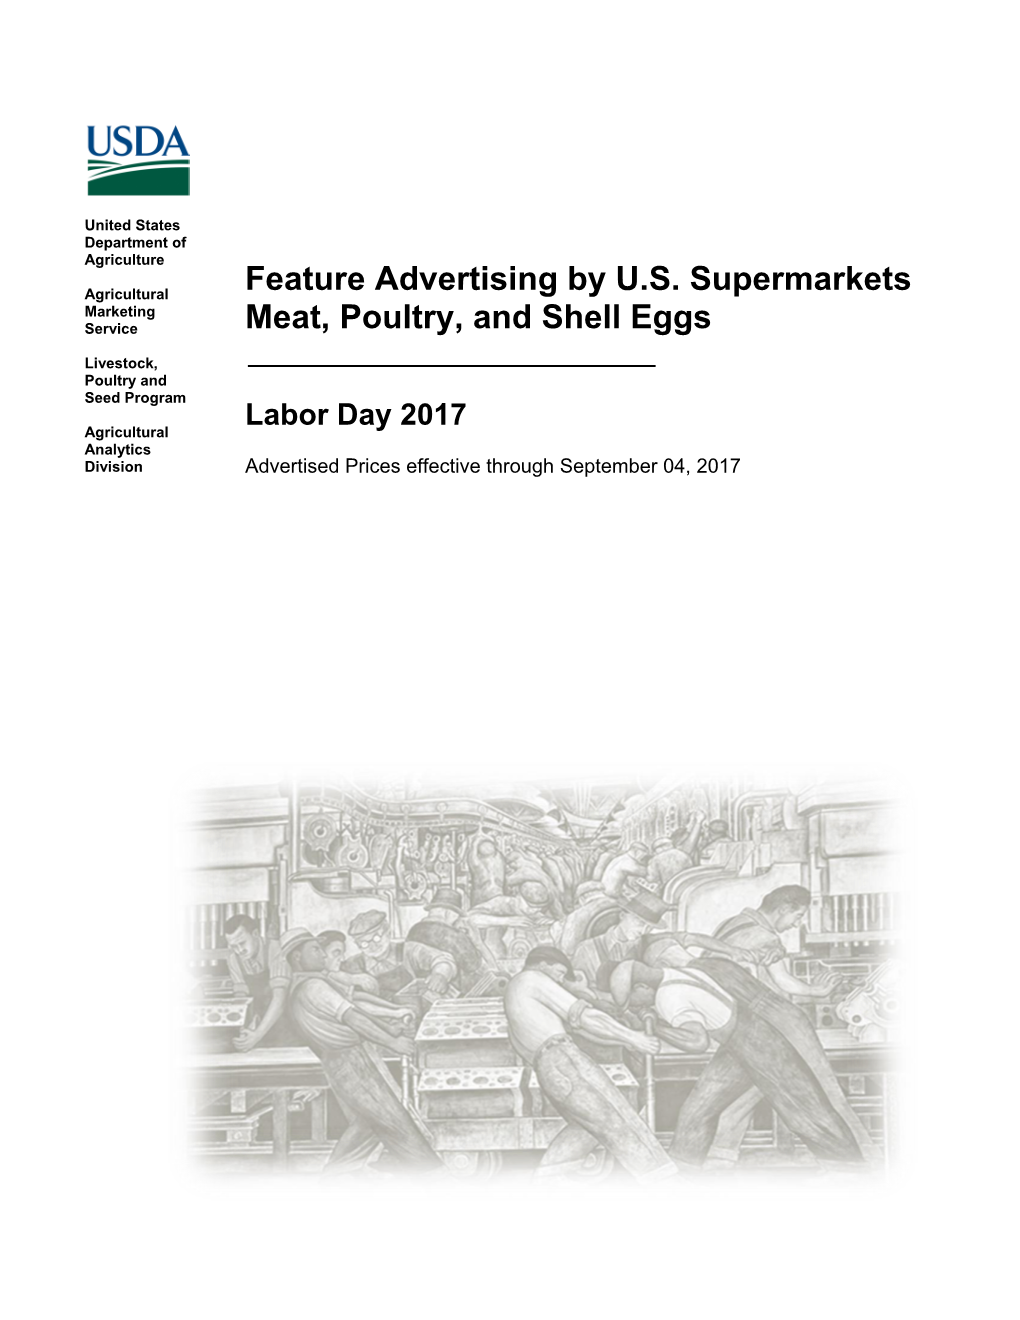 Feature Advertising by U.S. Supermarkets Meat, Poultry, and Shell Eggs